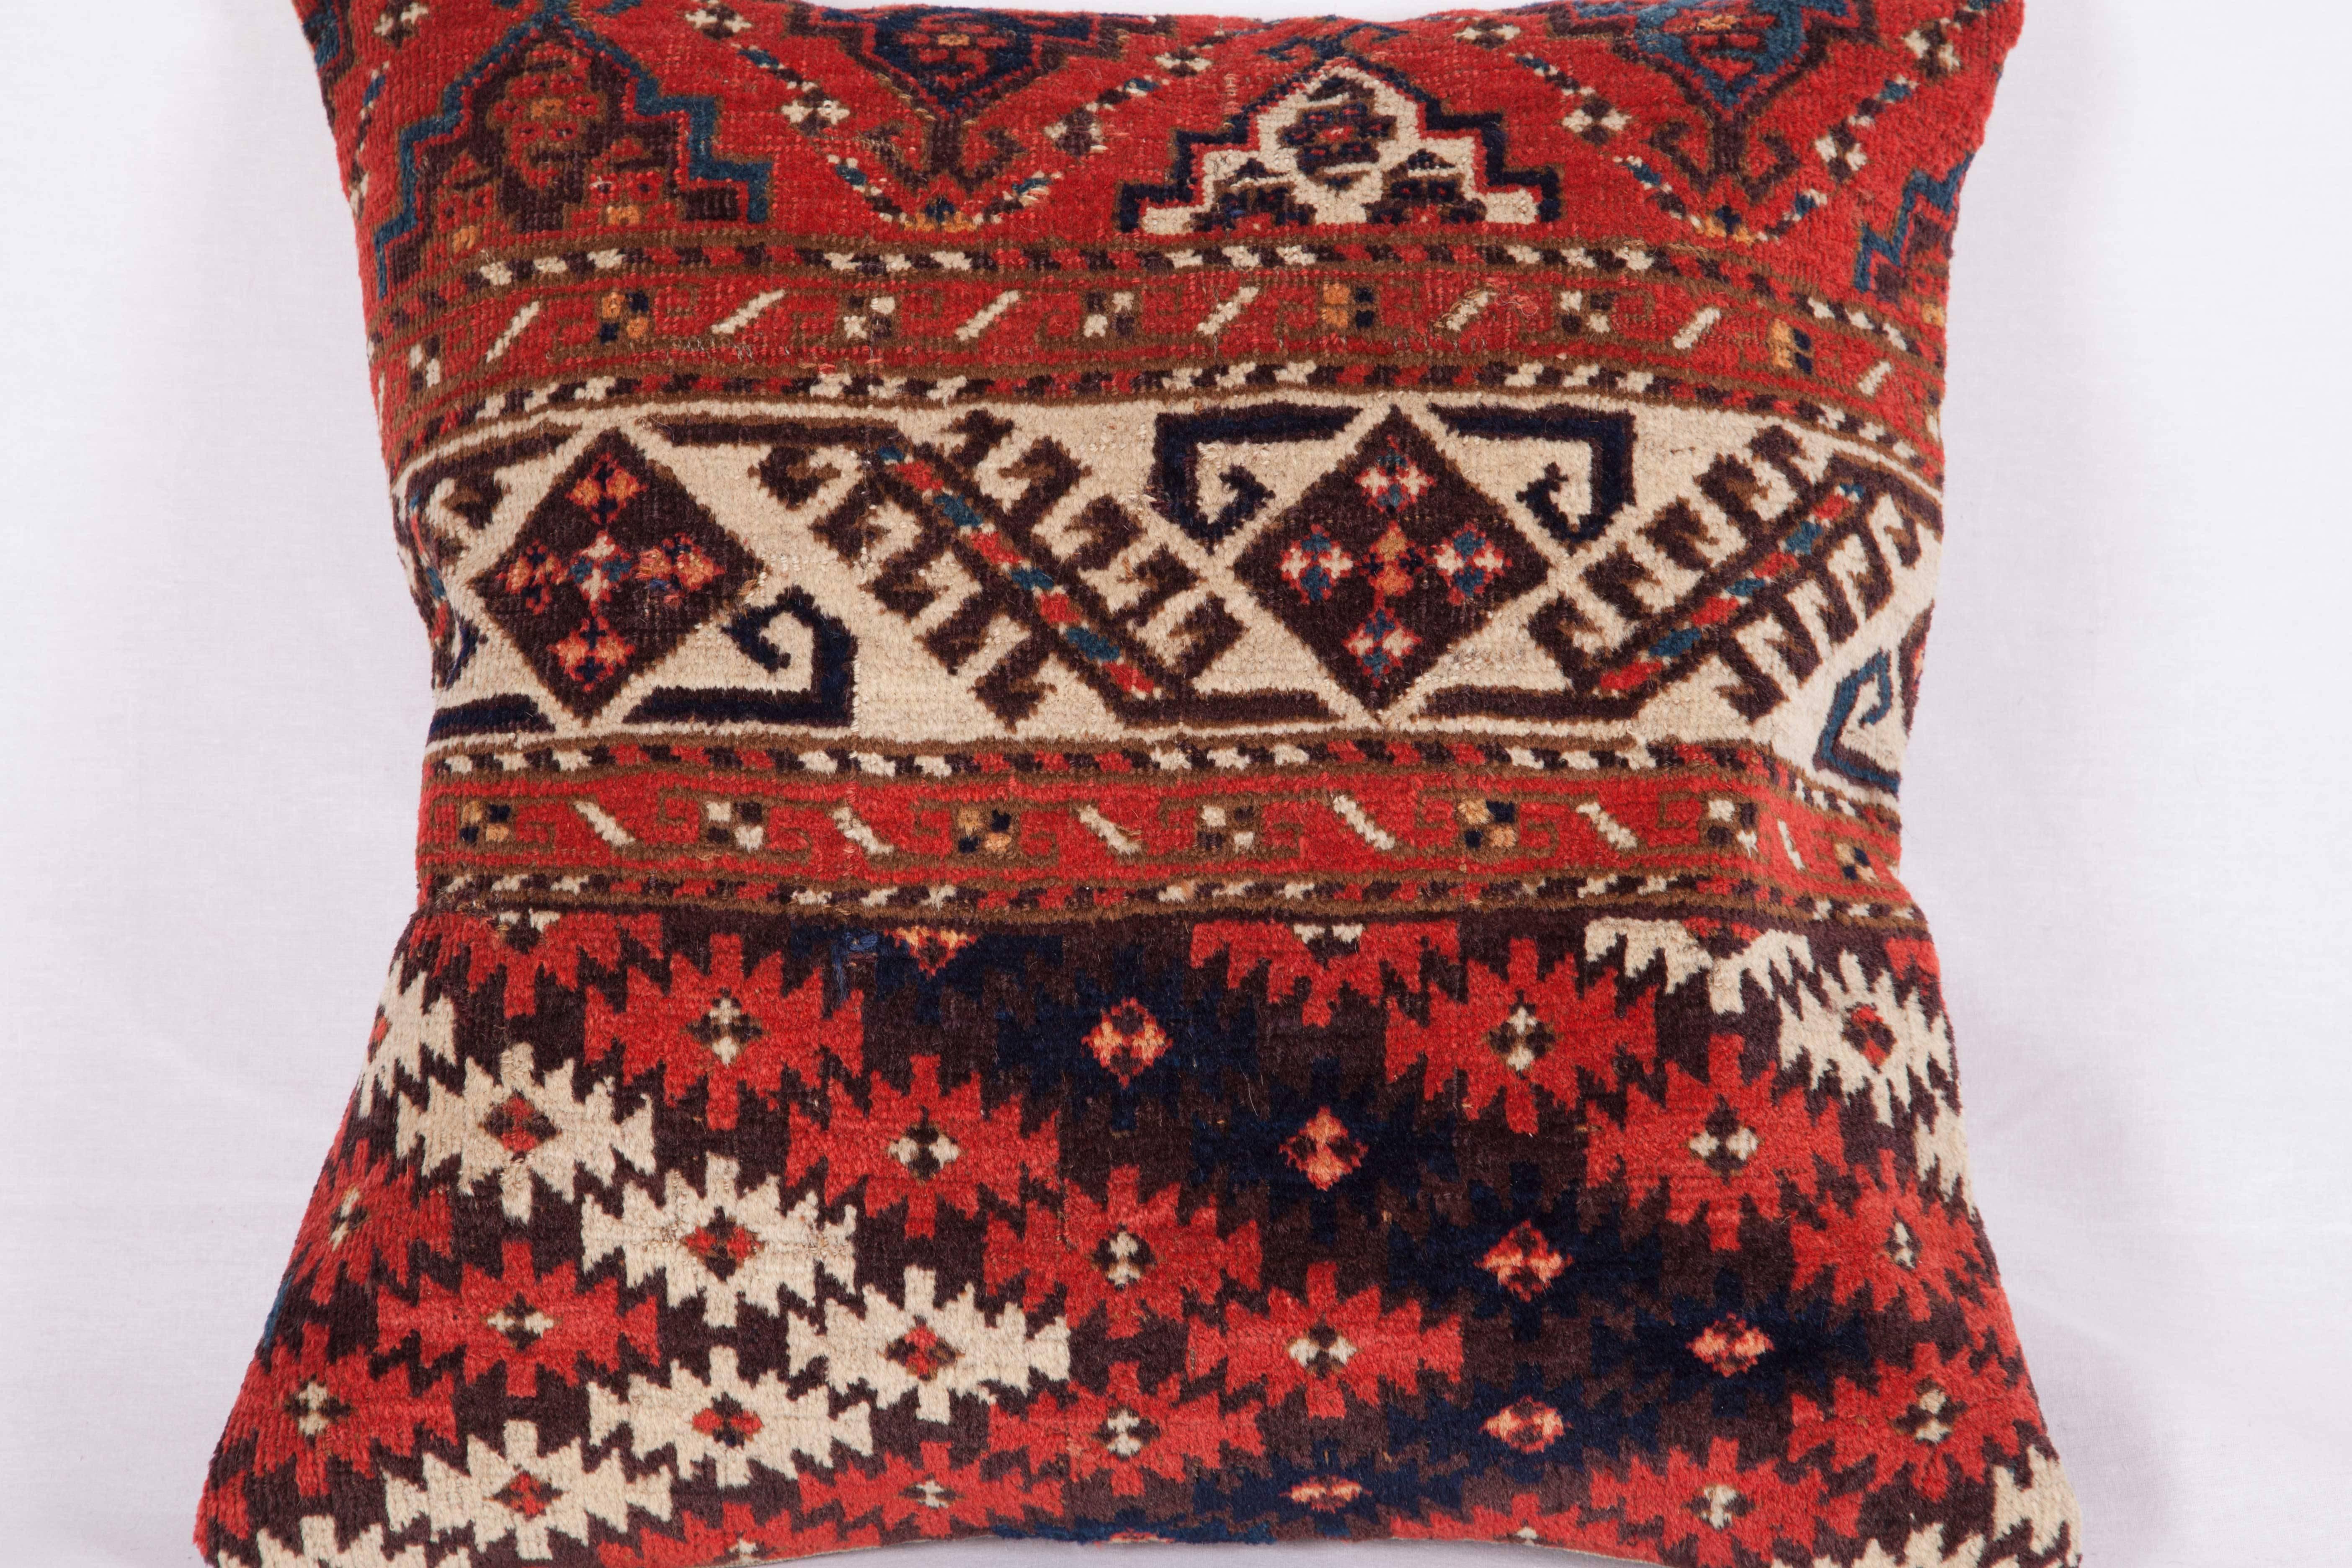 Wool Pillows Made Out of a 19th Century Turkmen Chodor Tribe Main Rug Fragment